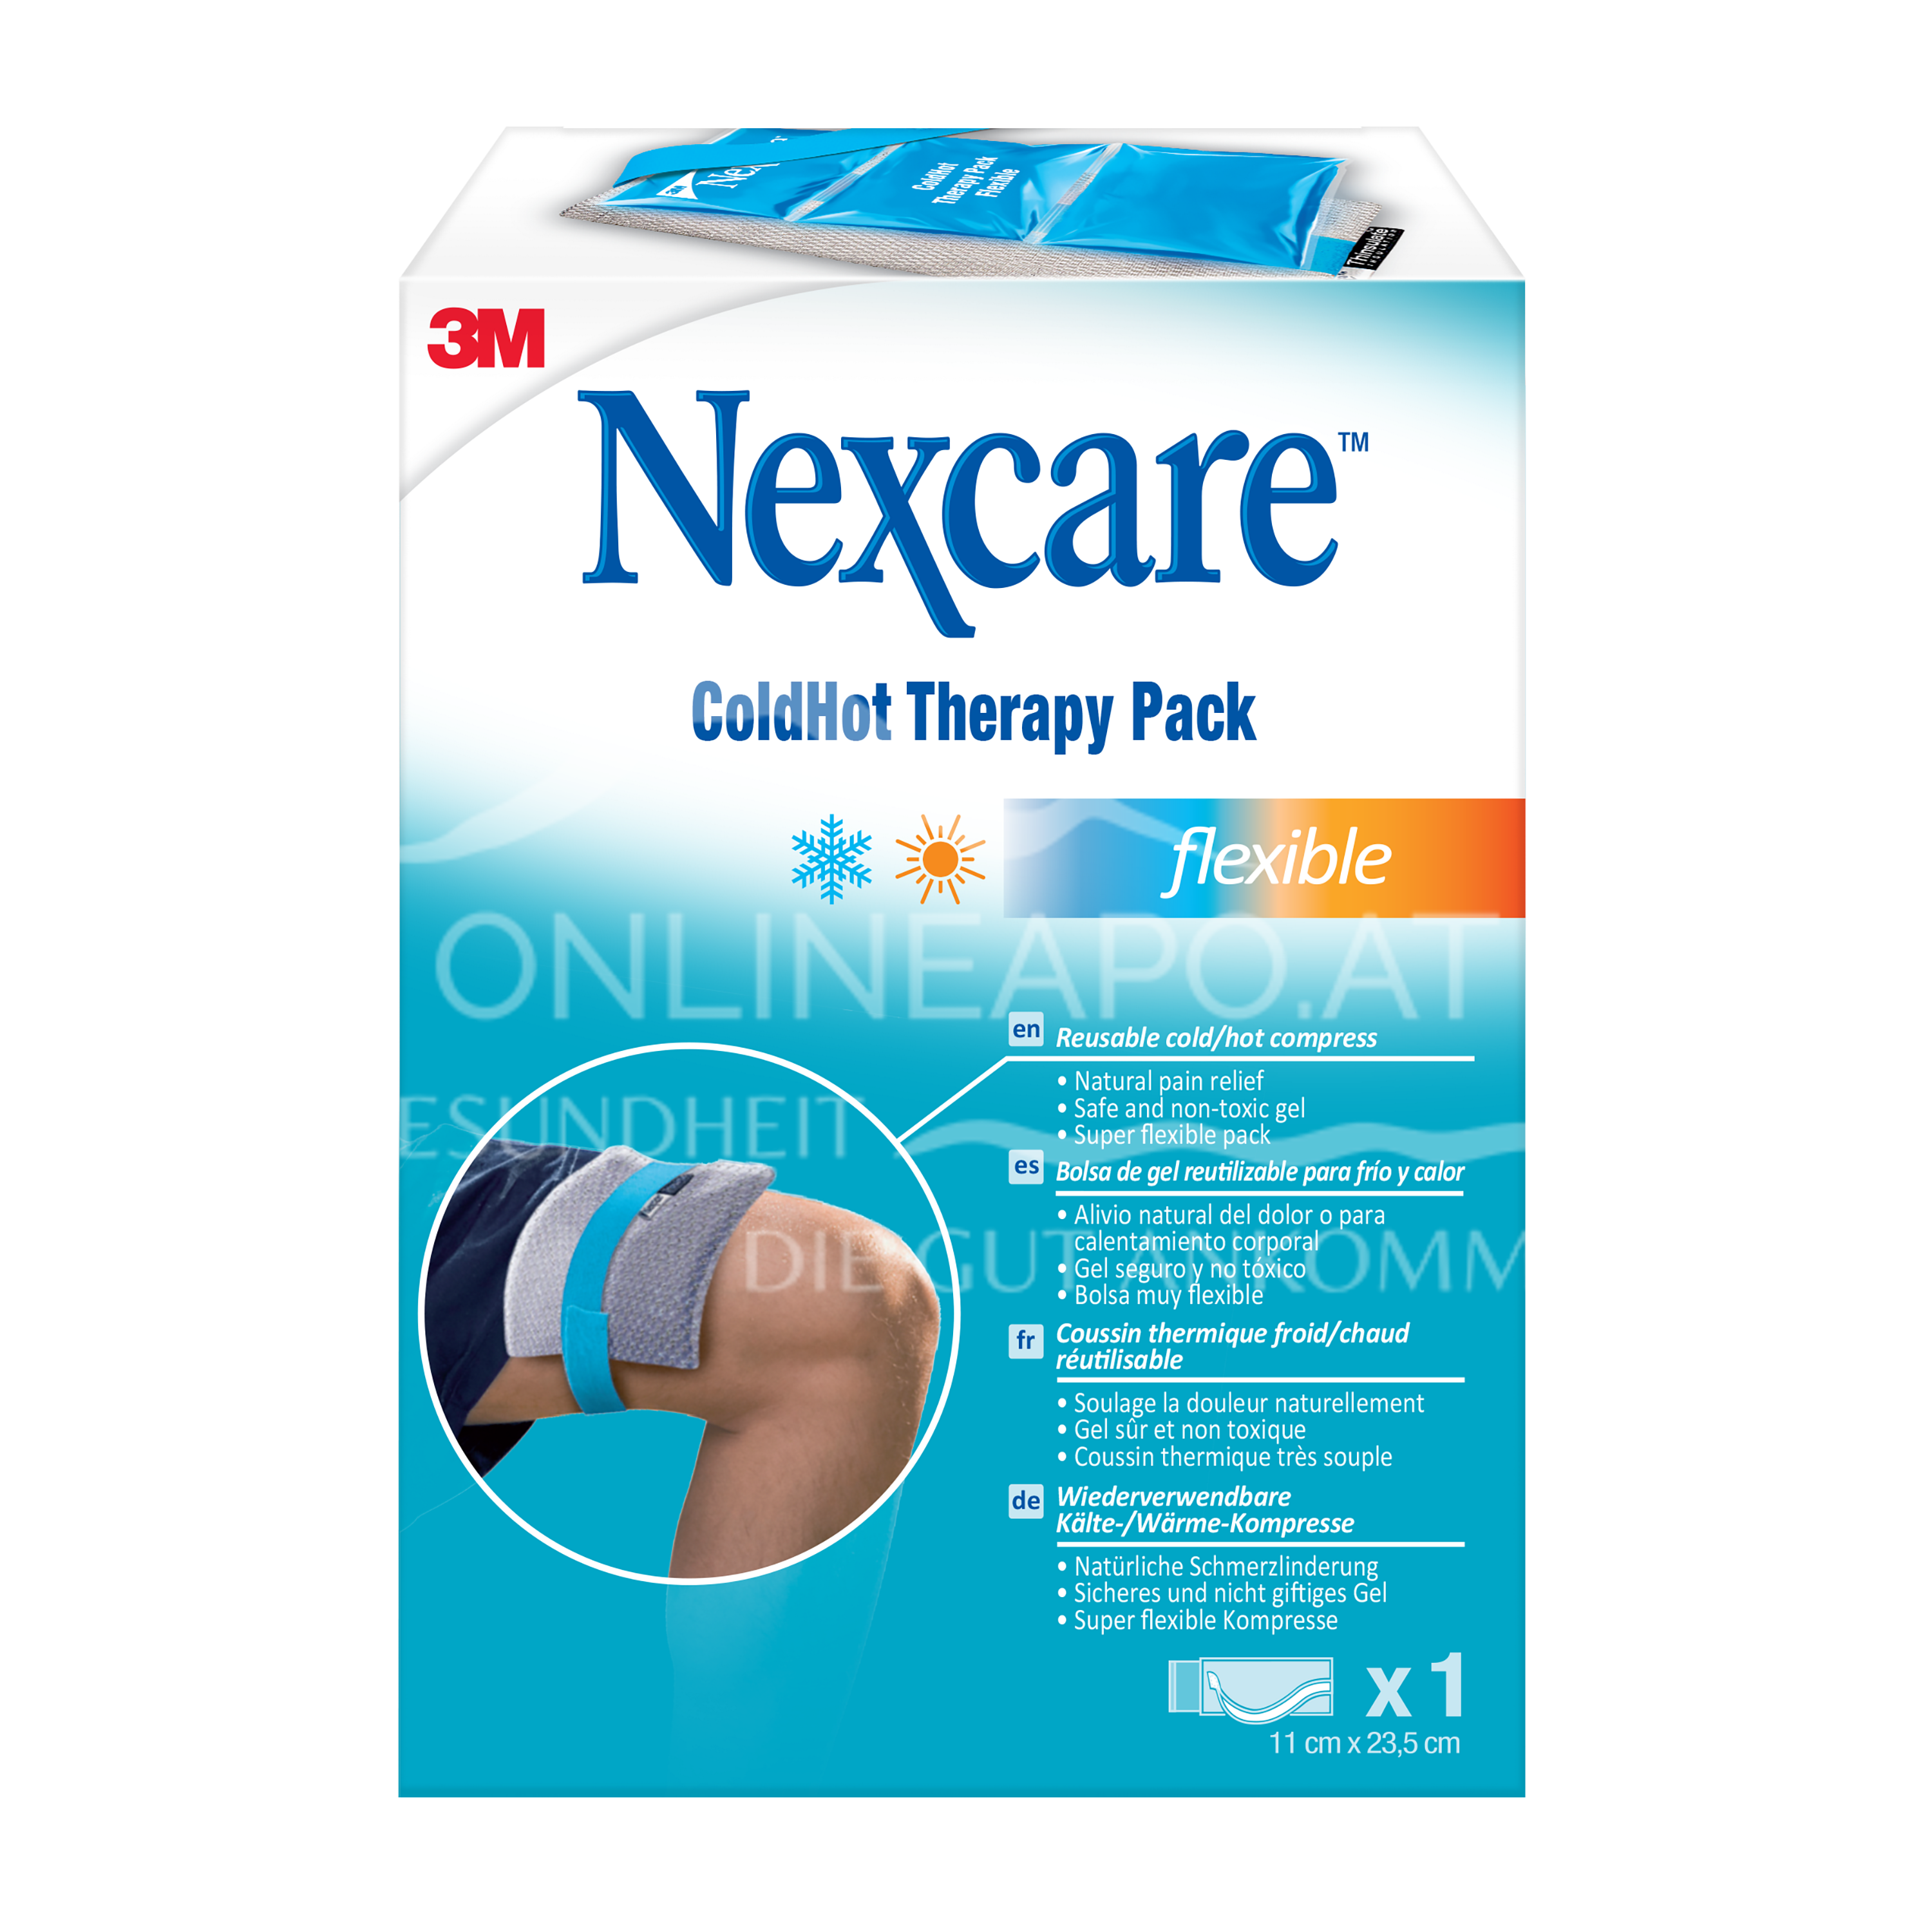 3M Nexcare™ ColdHot Therapy Pack Flexible Thinsulate